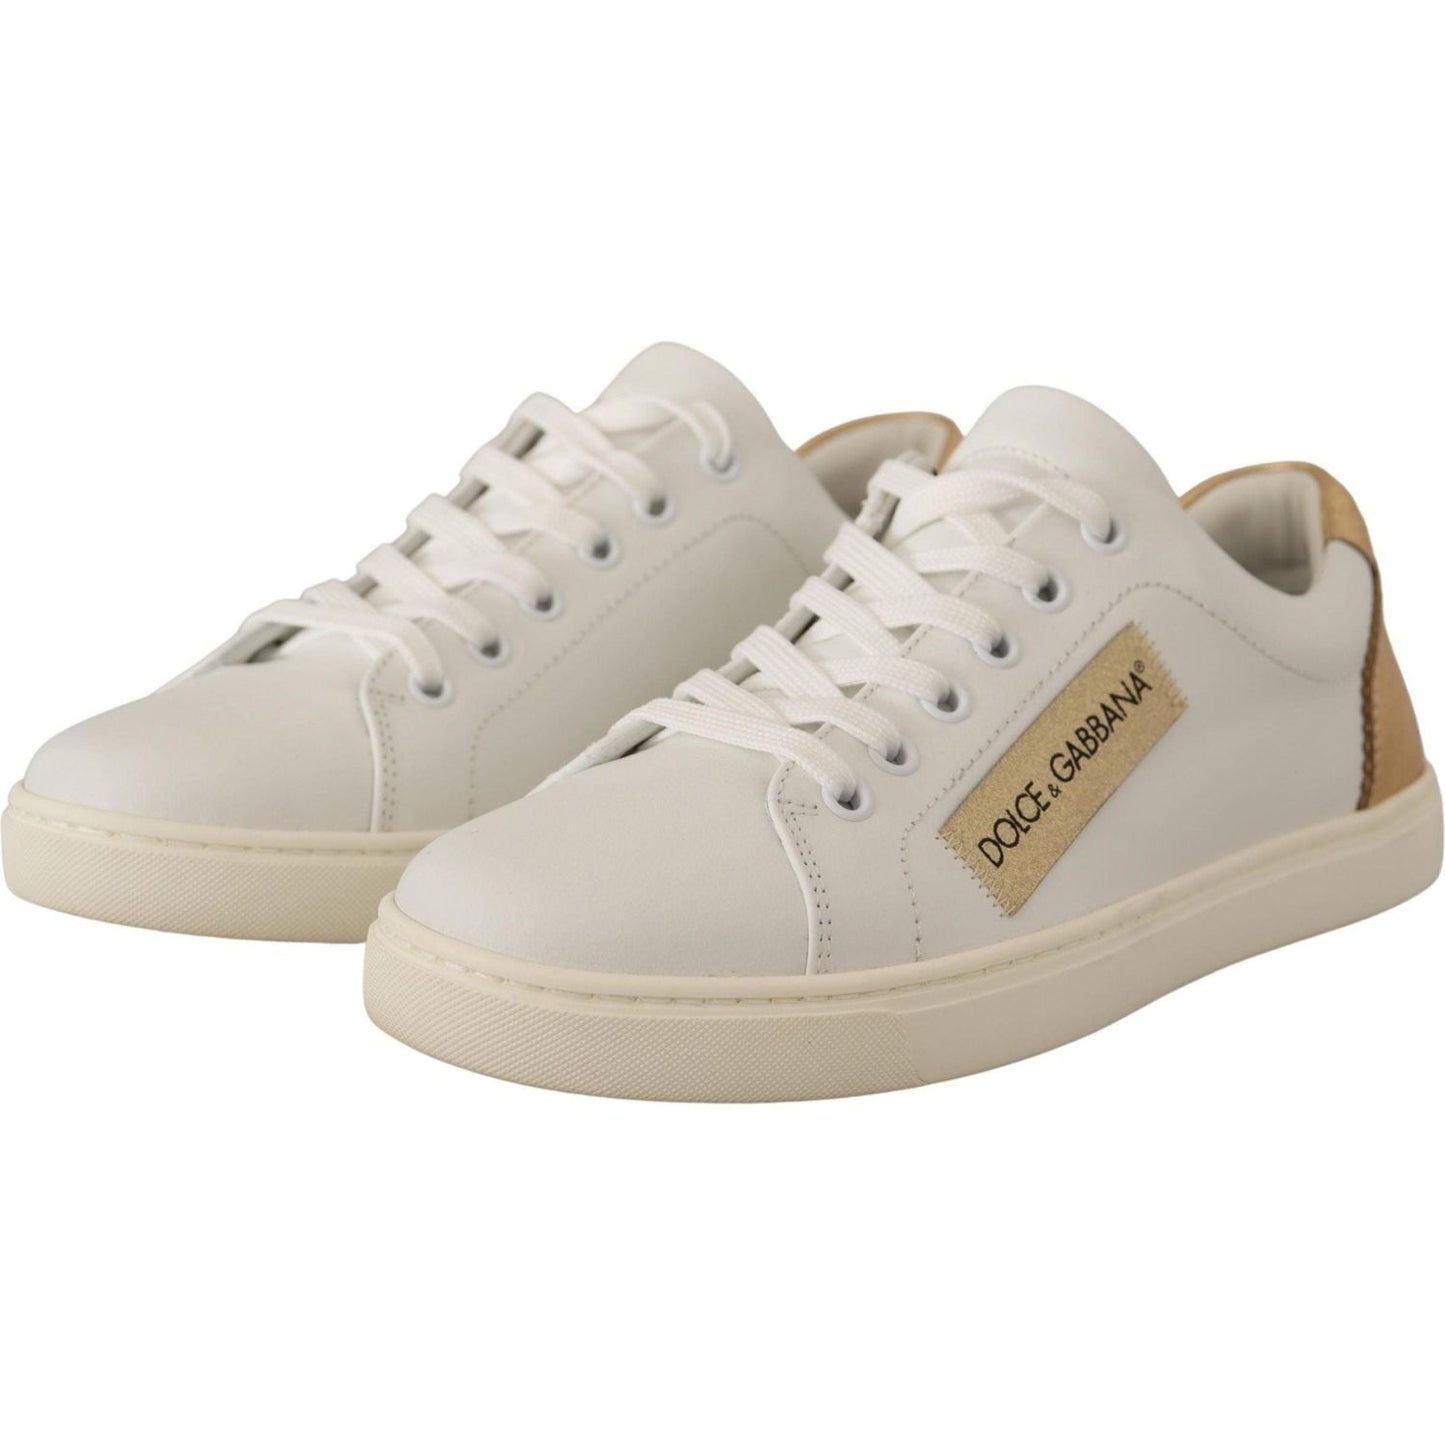 Dolce & Gabbana Elegant White Leather Sneakers with Gold Accents white-gold-leather-low-top-sneakers IMG_0490-scaled-cbad4f7d-ea2.jpg